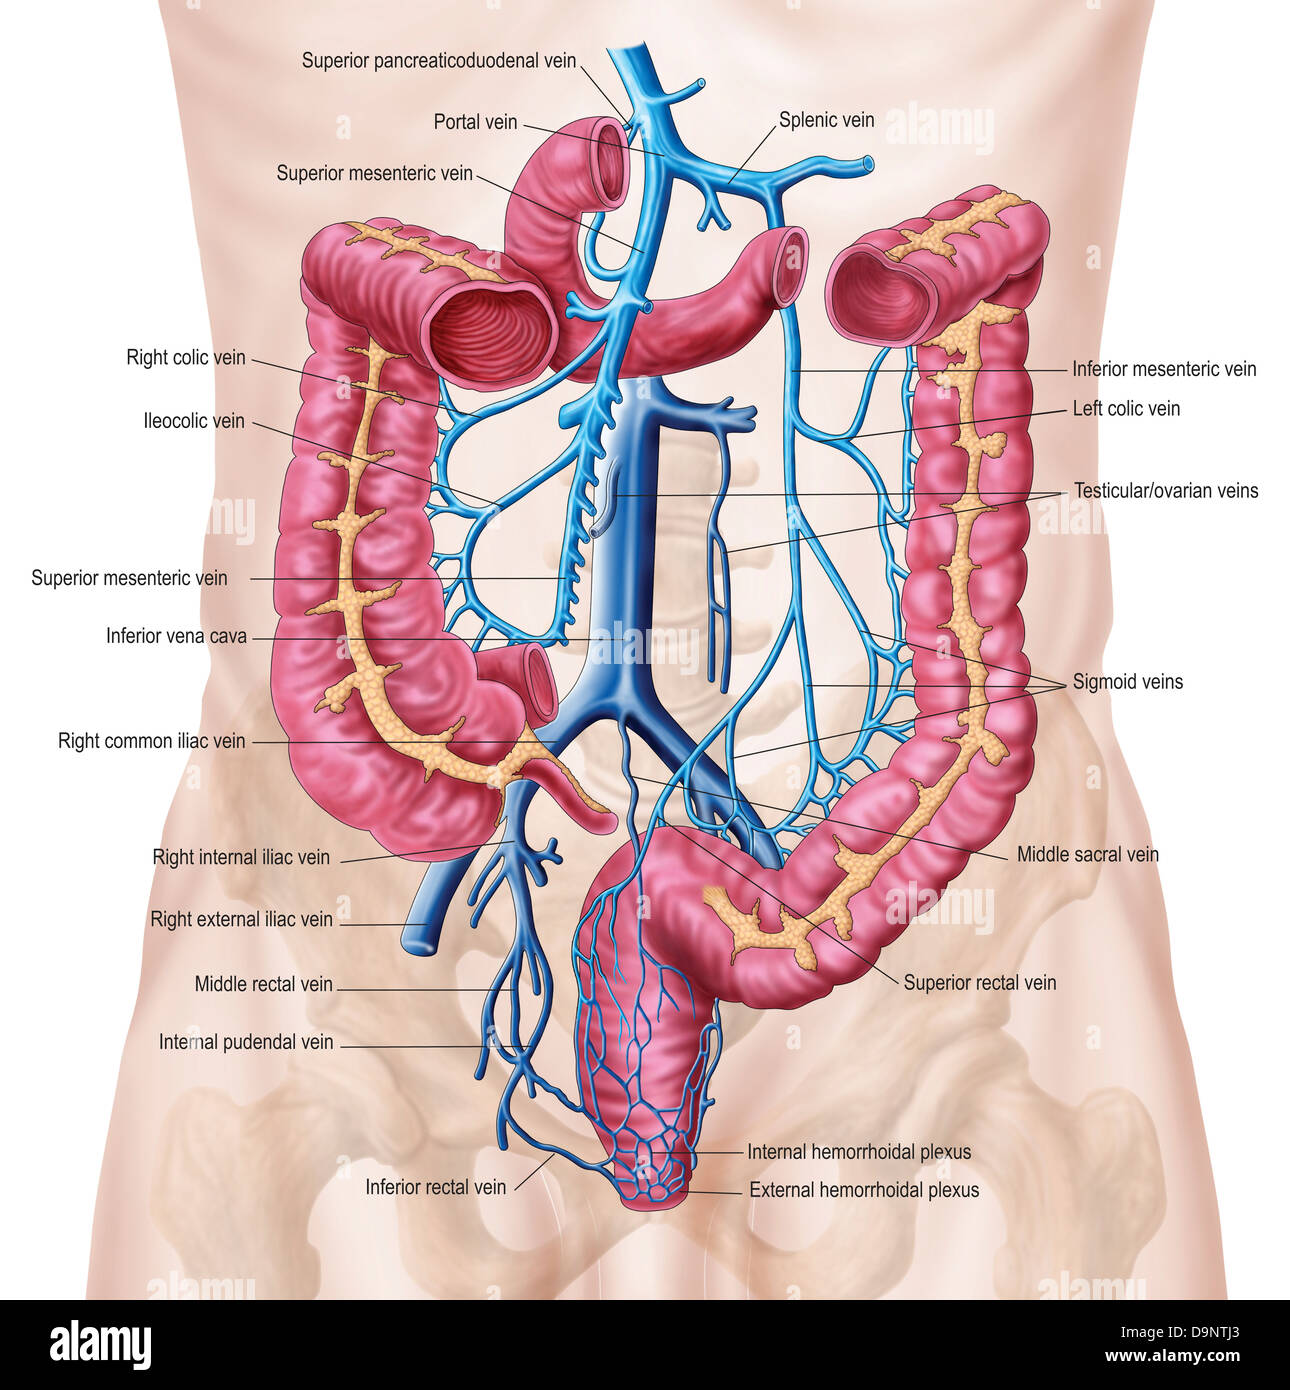 Where can you find a free anatomy chart of the human abdomen?